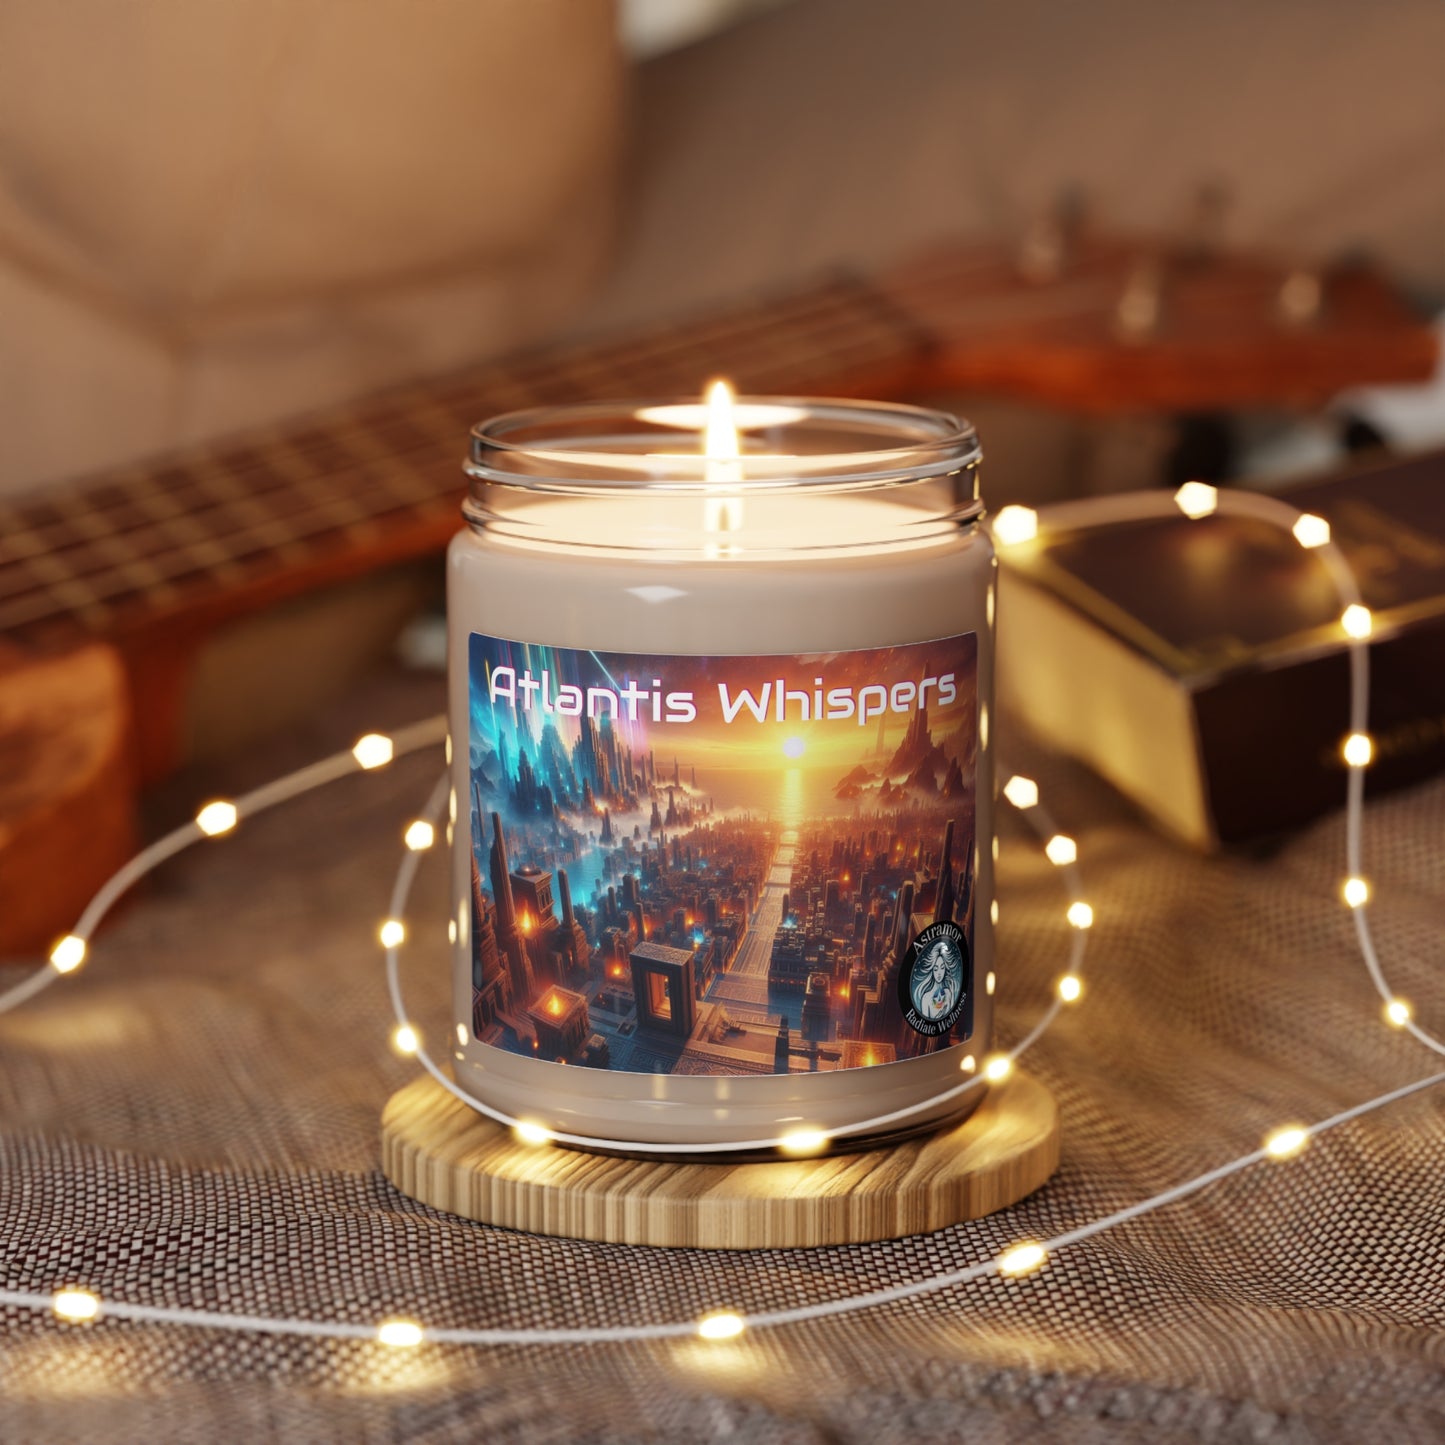 Astramor Atlantis Whispers - Soy Candle, 9oz